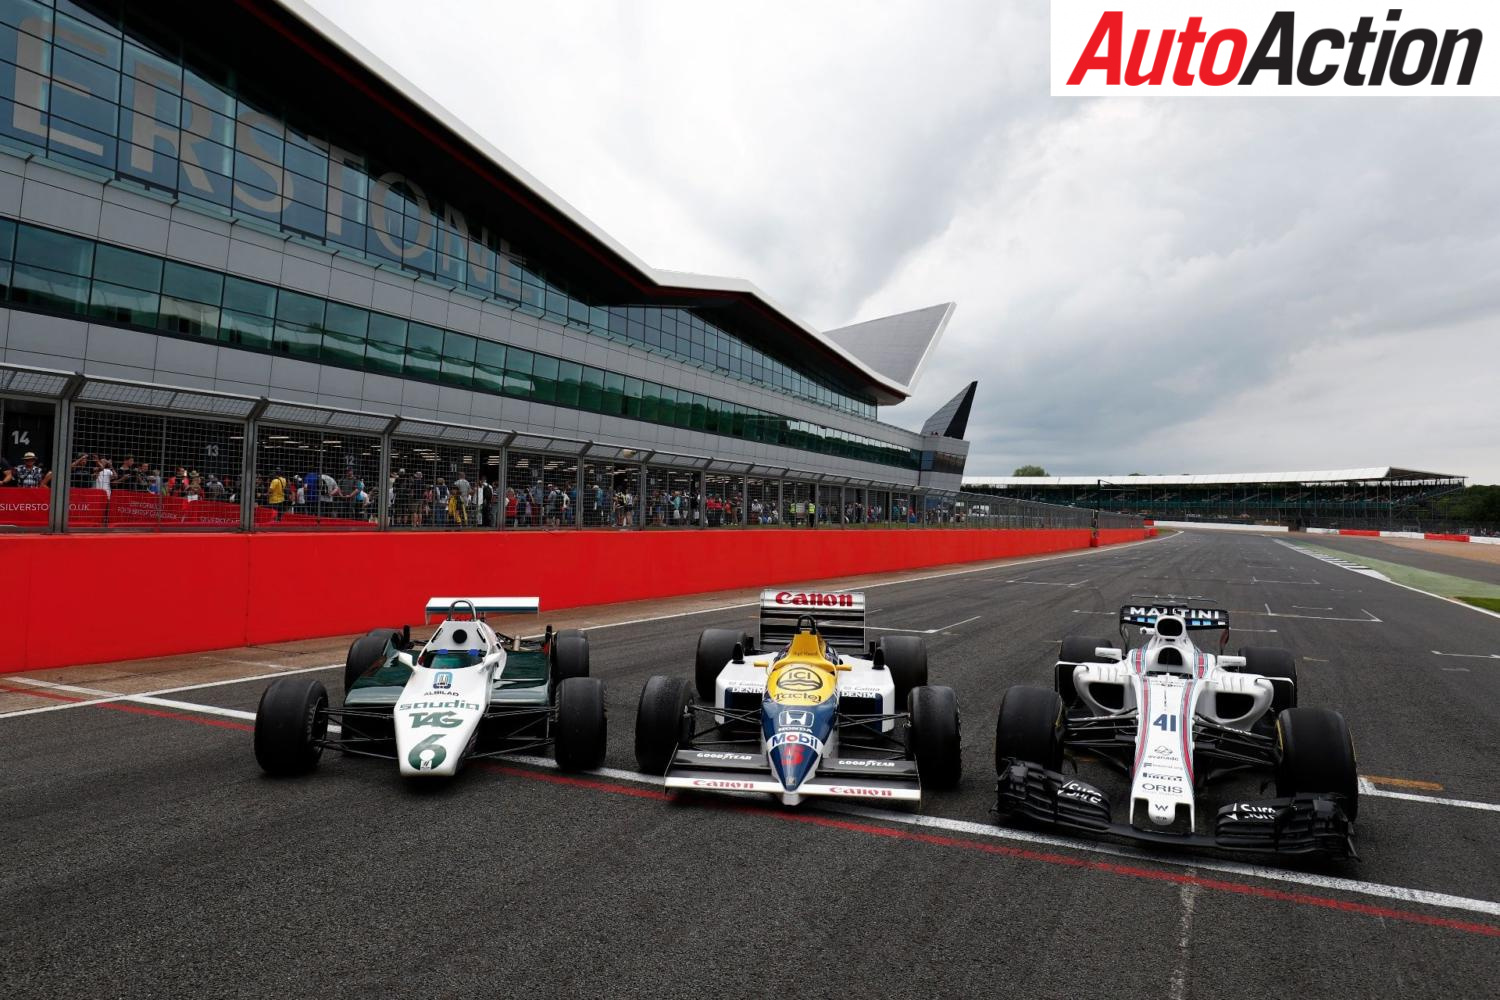 Williams 40 Anniversary Event at Silverstone - Photo: LAT